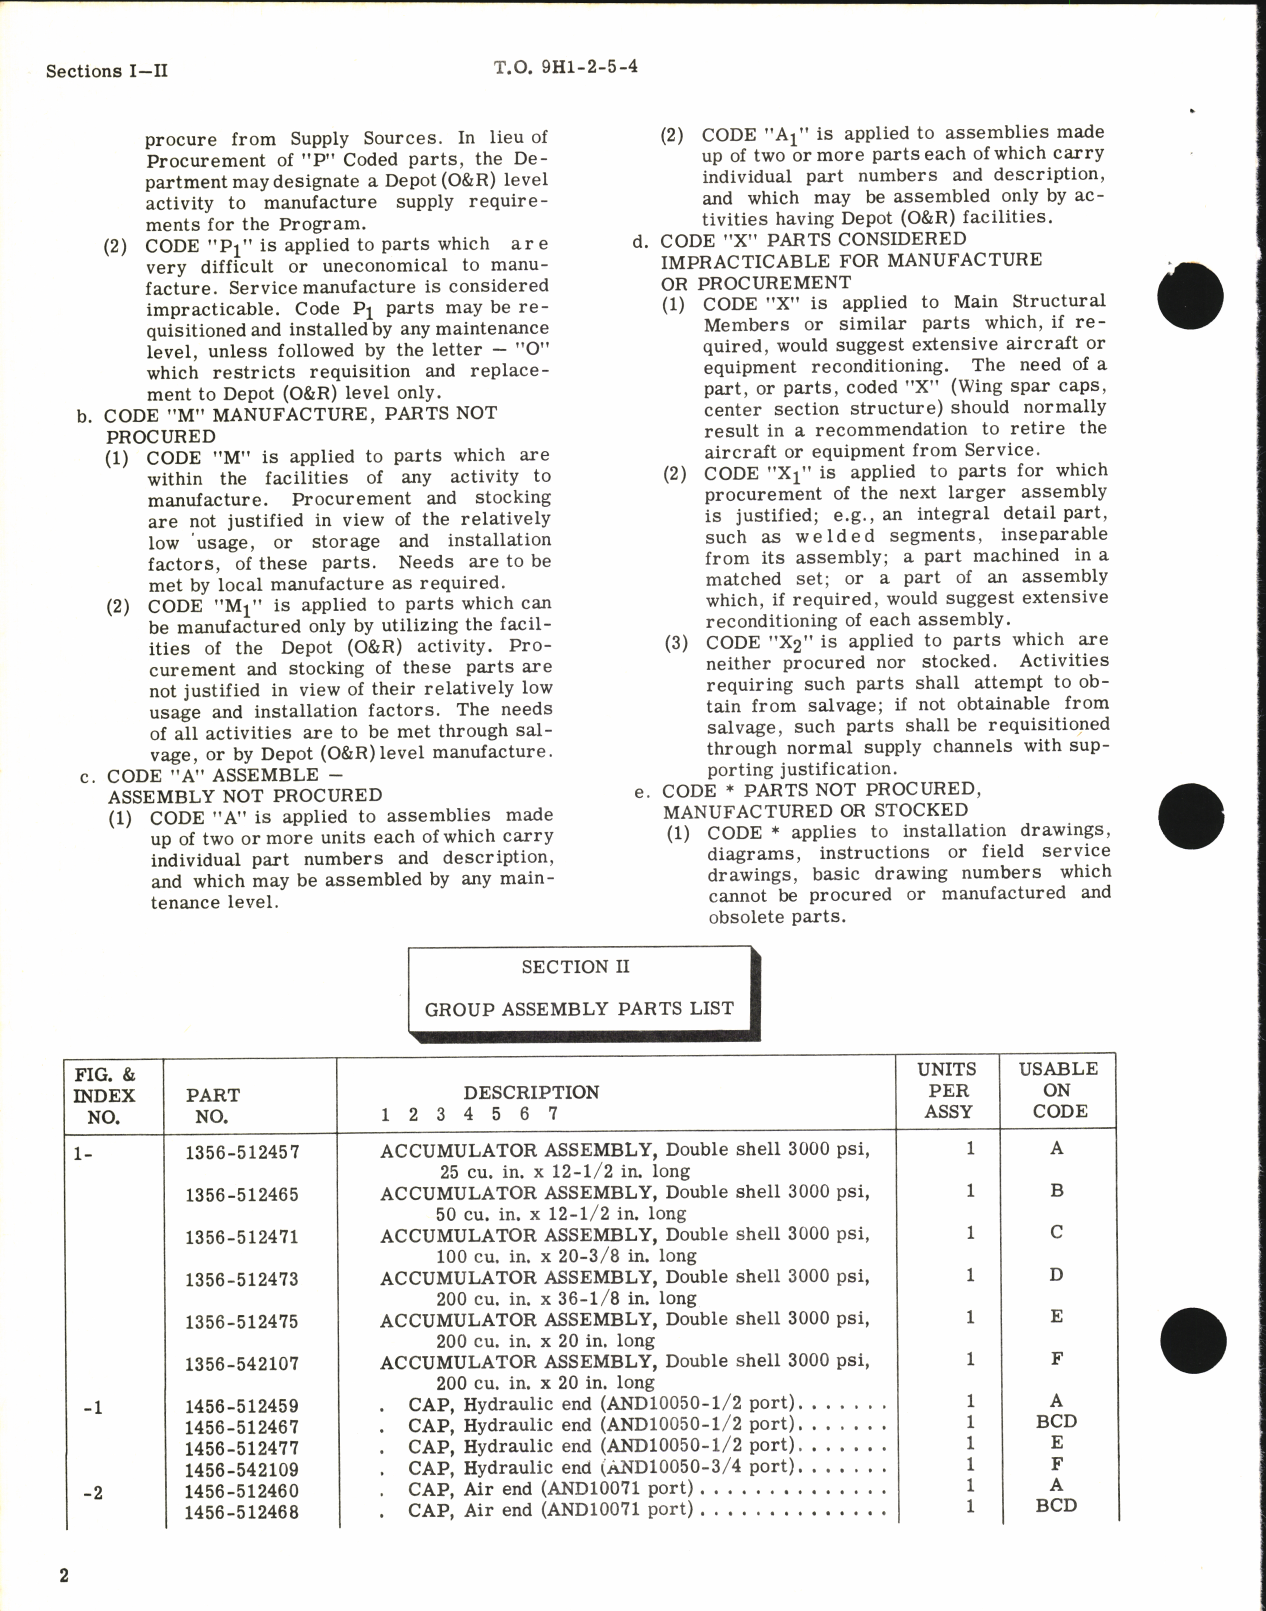 Sample page 4 from AirCorps Library document: Illustrated Parts Breakdown for Accumulator Assemblies